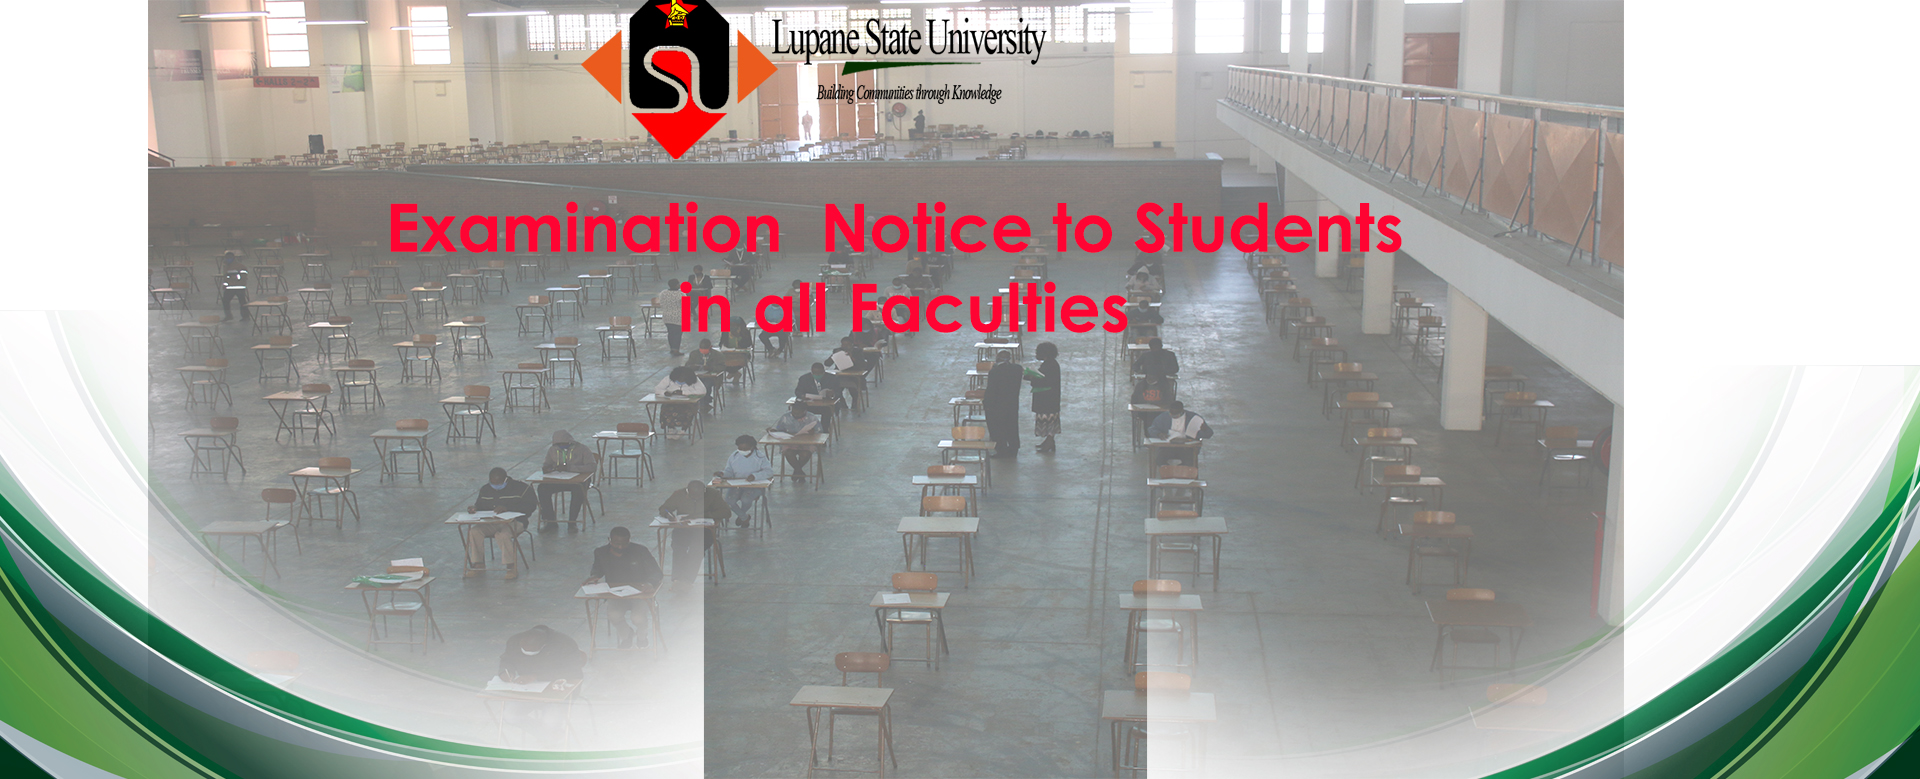 Examination Notice to Students in all Faculities